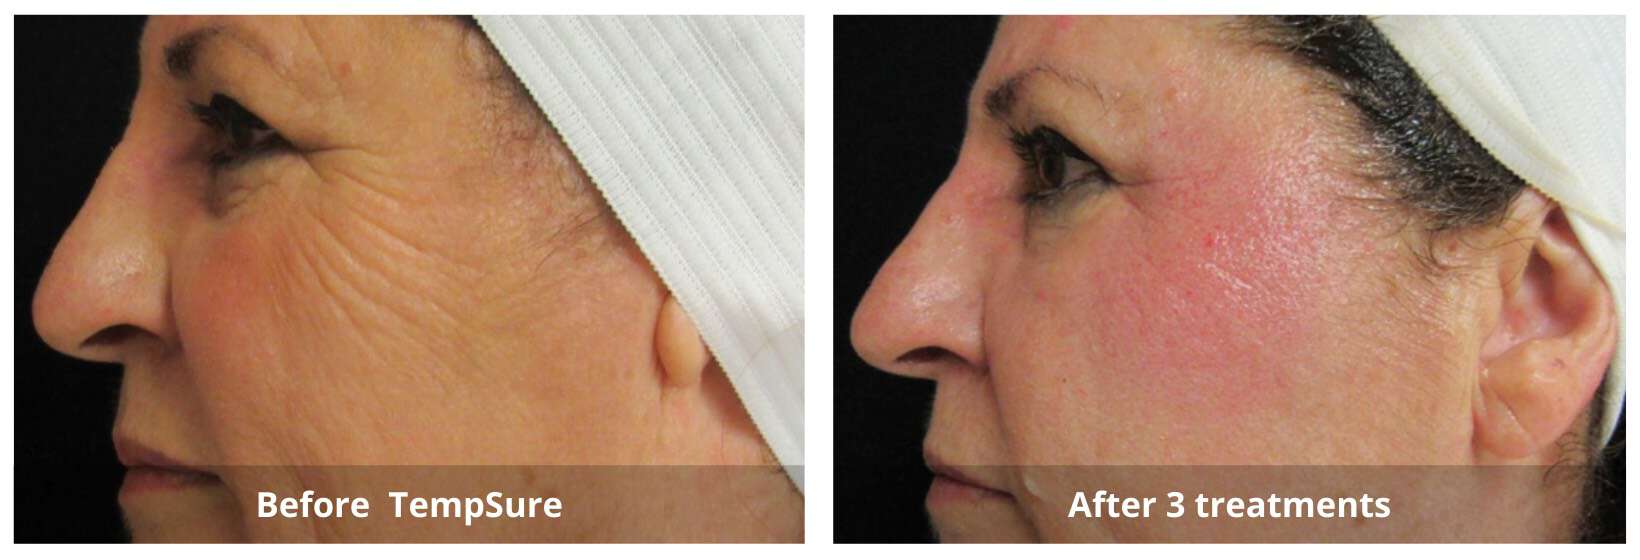 TempSure Skin Tightening Before and After 3-Sunshine-Kitchener-Waterloo-Cosmetic-Clinic-And-Medical-Spa